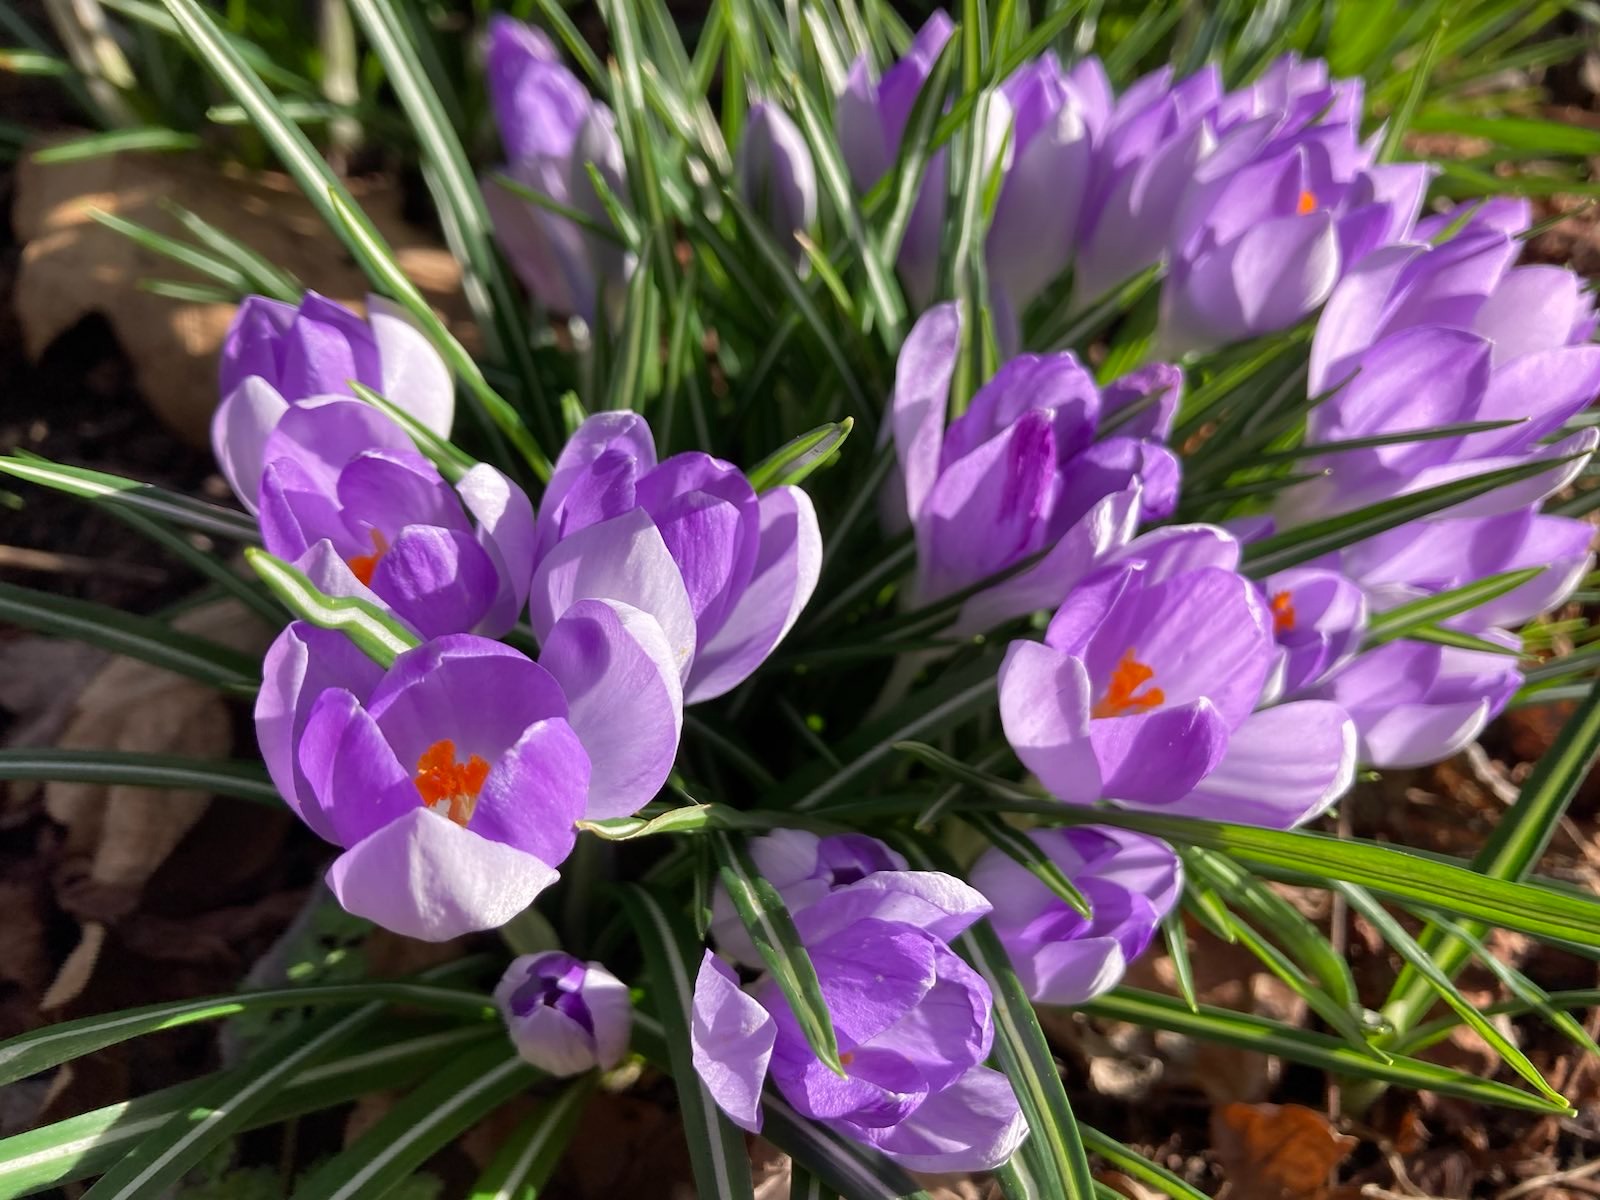 A large cluster of purple crocuses opening up in the sunshine to reveal very orange anthers.